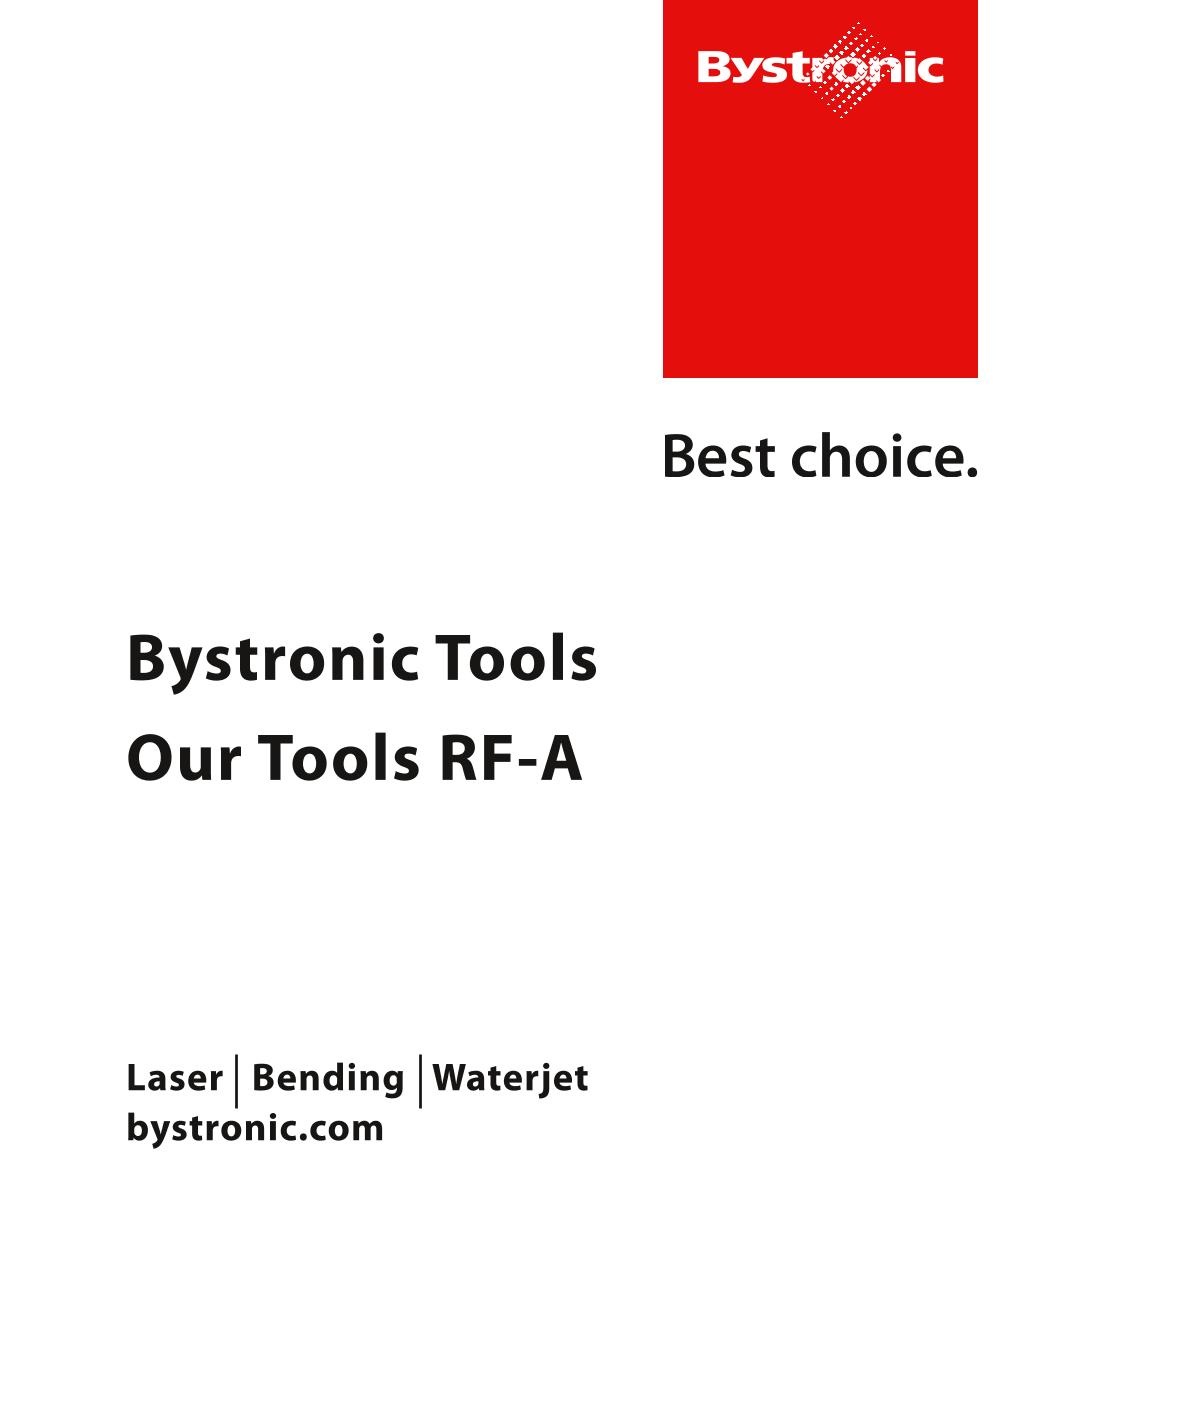 Bystronic Type Tools